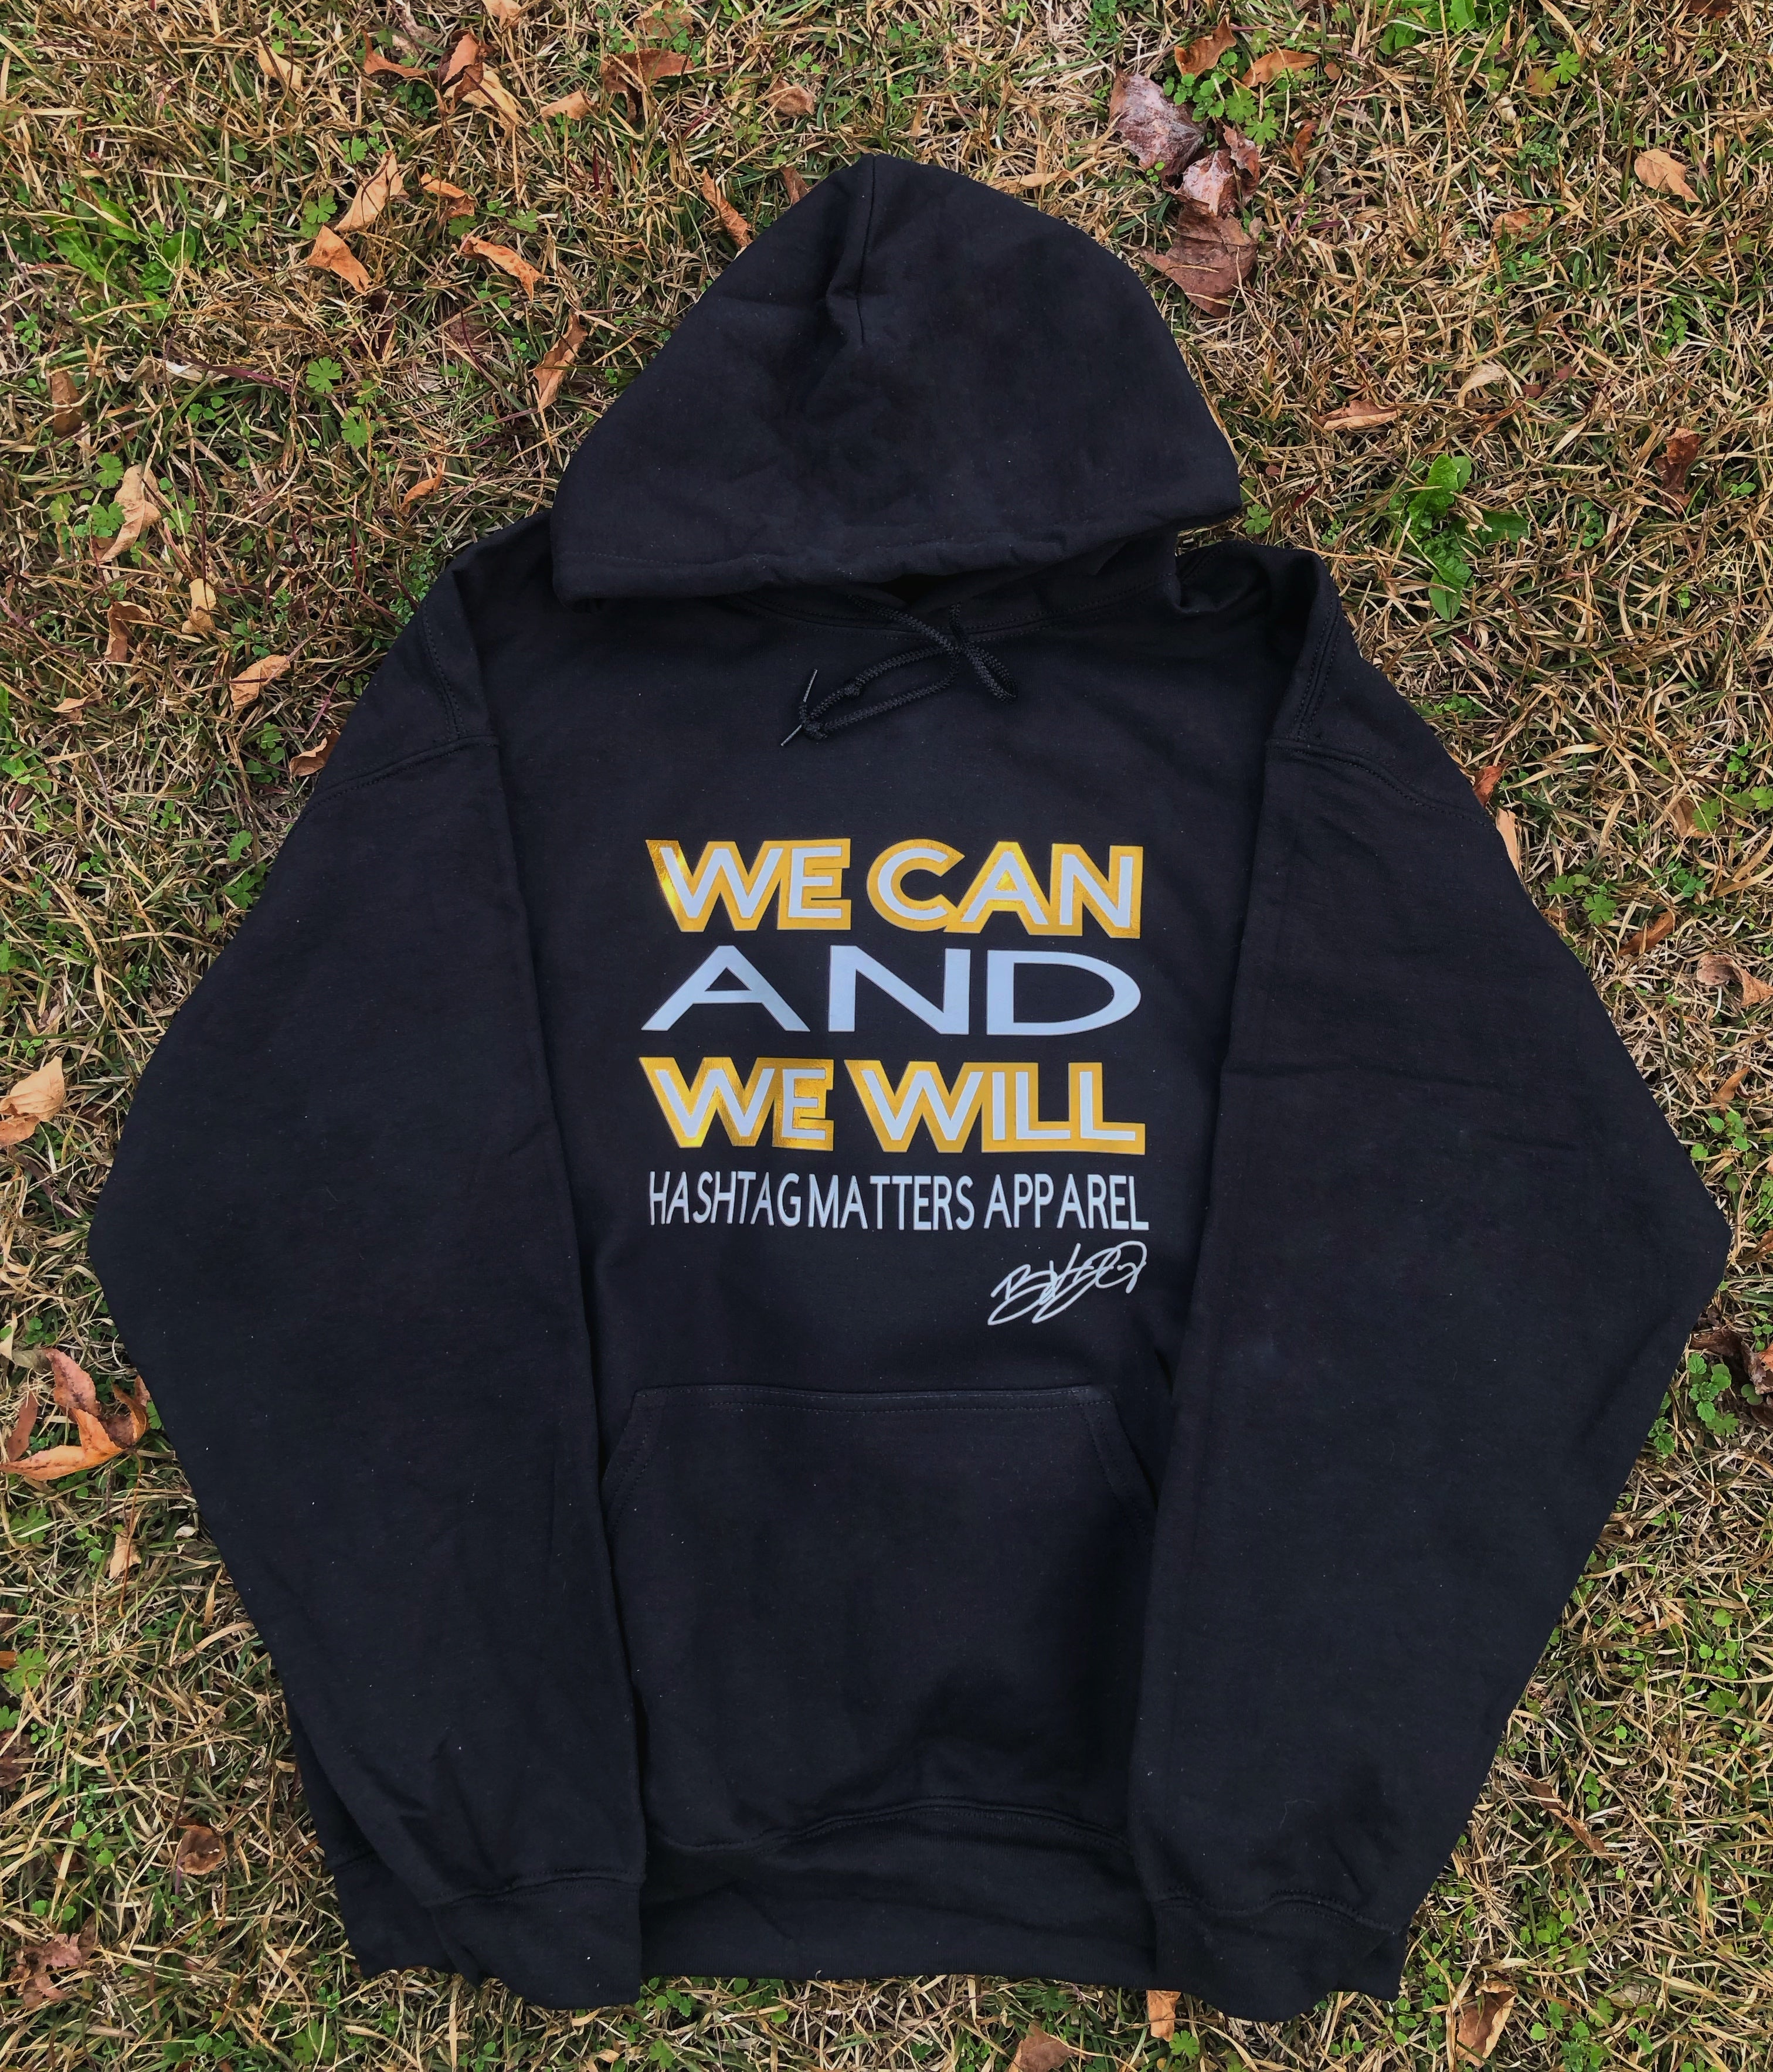 We Can And We Will. Hashtag Matters Hoodie